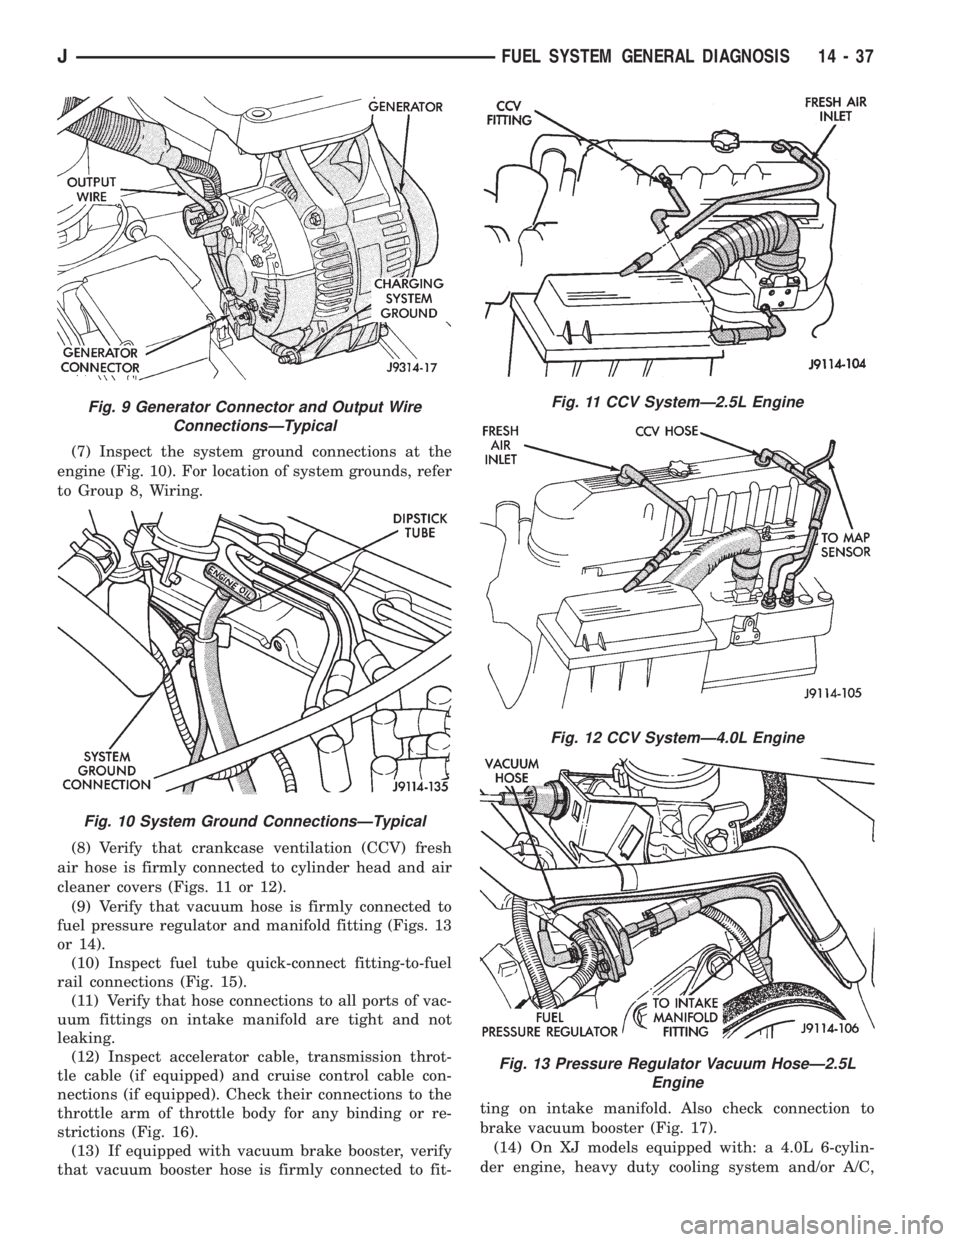 JEEP XJ 1995  Service And Repair Manual (7) Inspect the system ground connections at the
engine (Fig. 10). For location of system grounds, refer
to Group 8, Wiring.
(8) Verify that crankcase ventilation (CCV) fresh
air hose is firmly connec